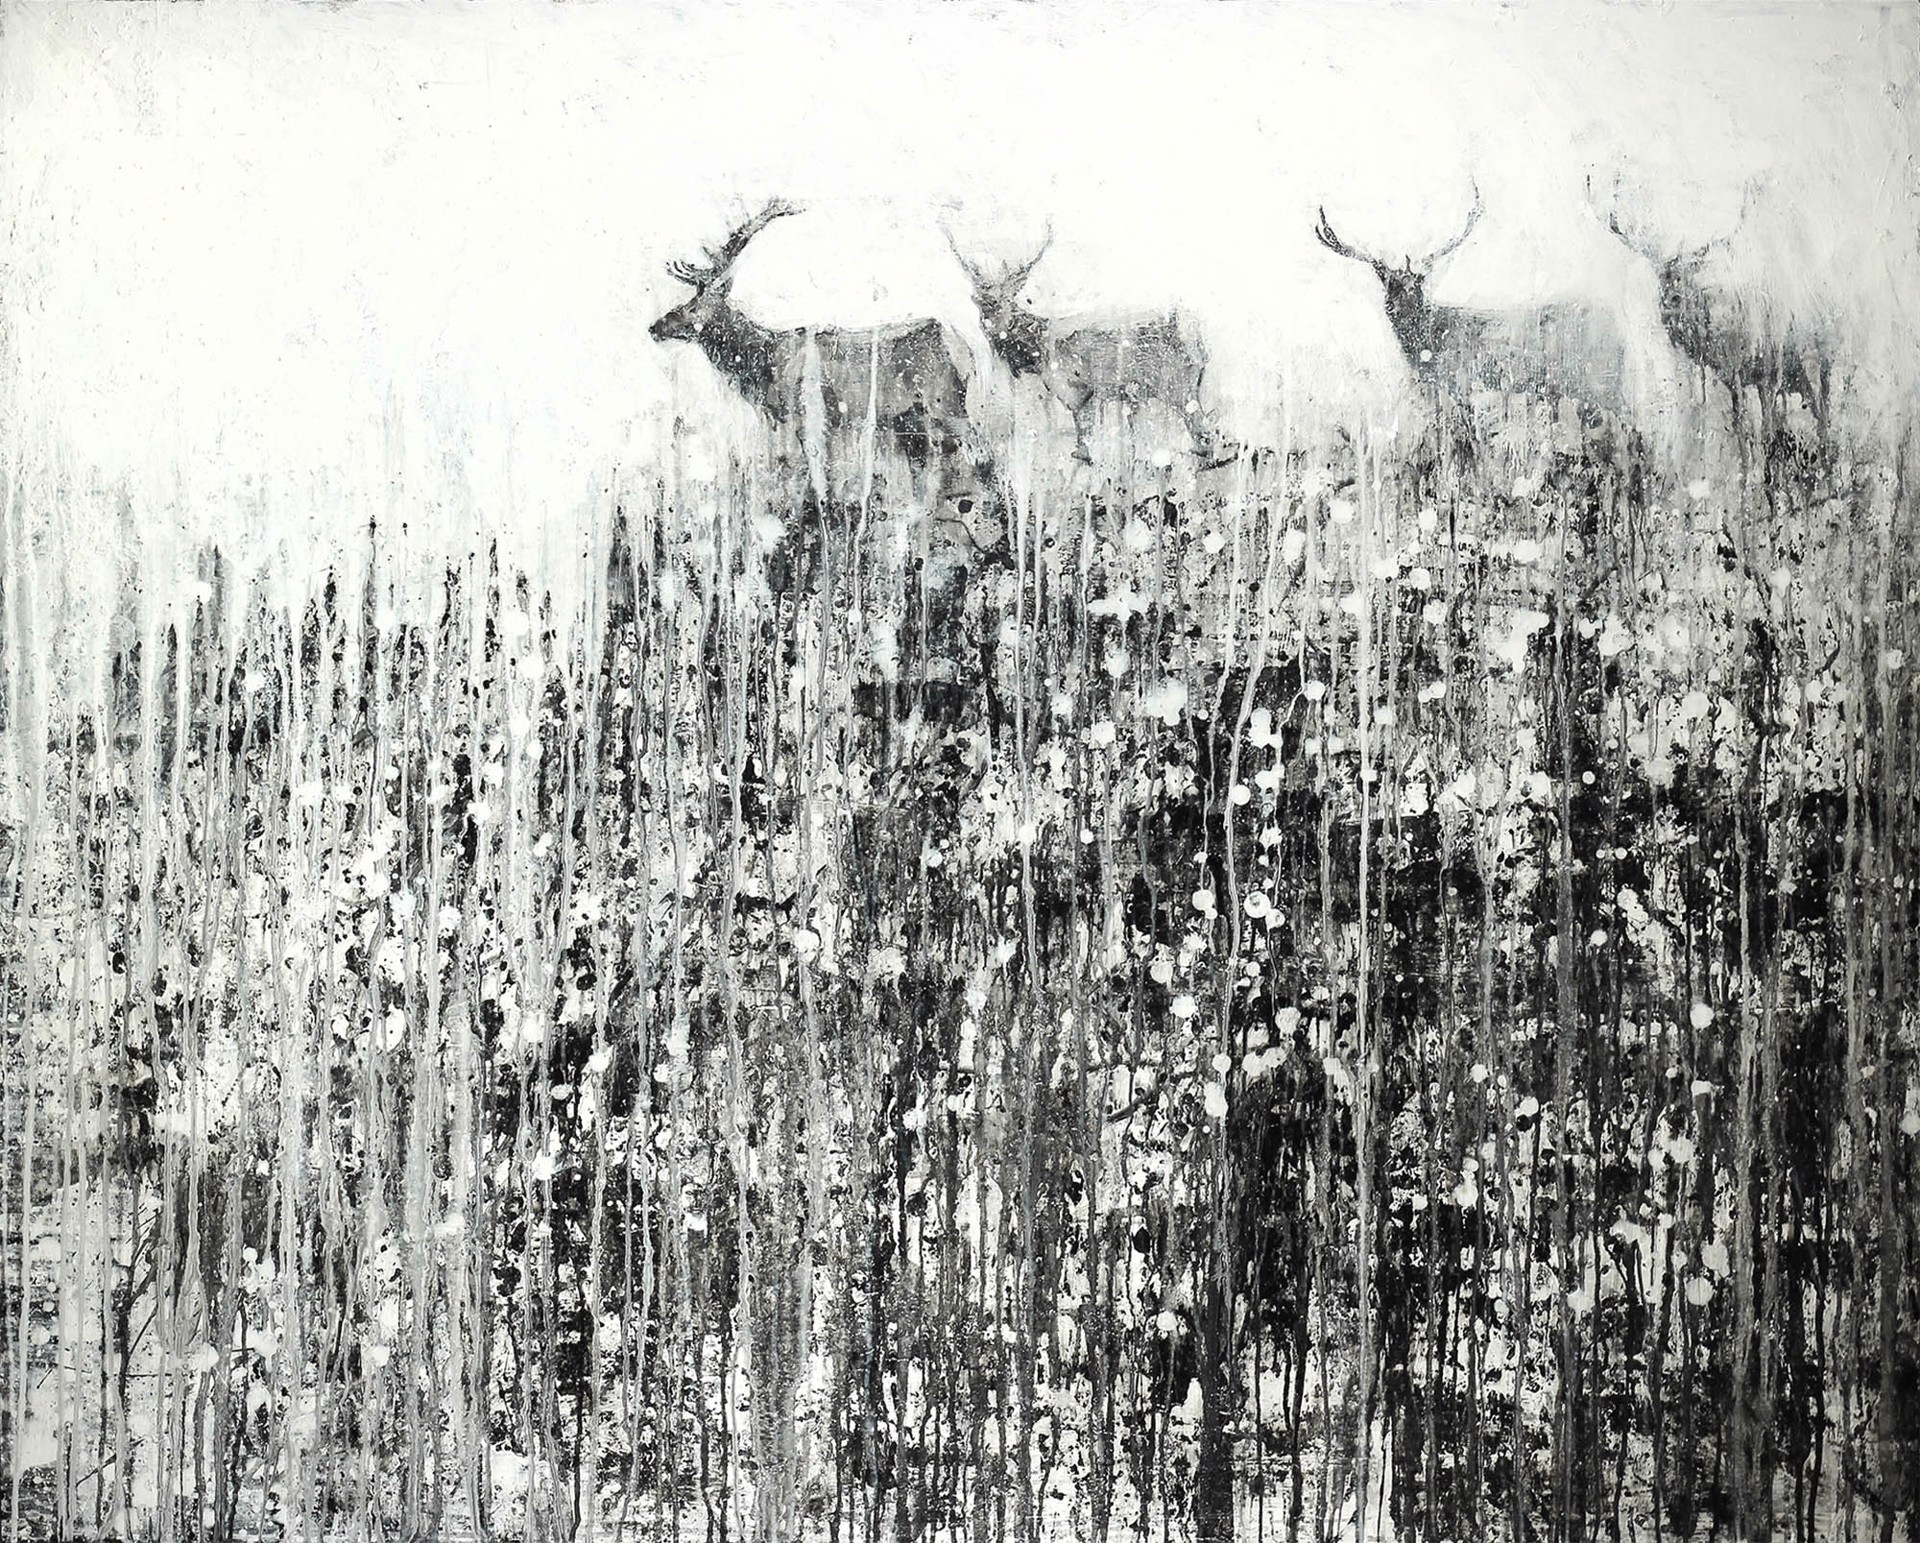 A Black And White Painting Of Elk Appearing In Mist With A Contemporary Drip And Splatter Foreground, By Matt Flint, Available At Gallery Wild